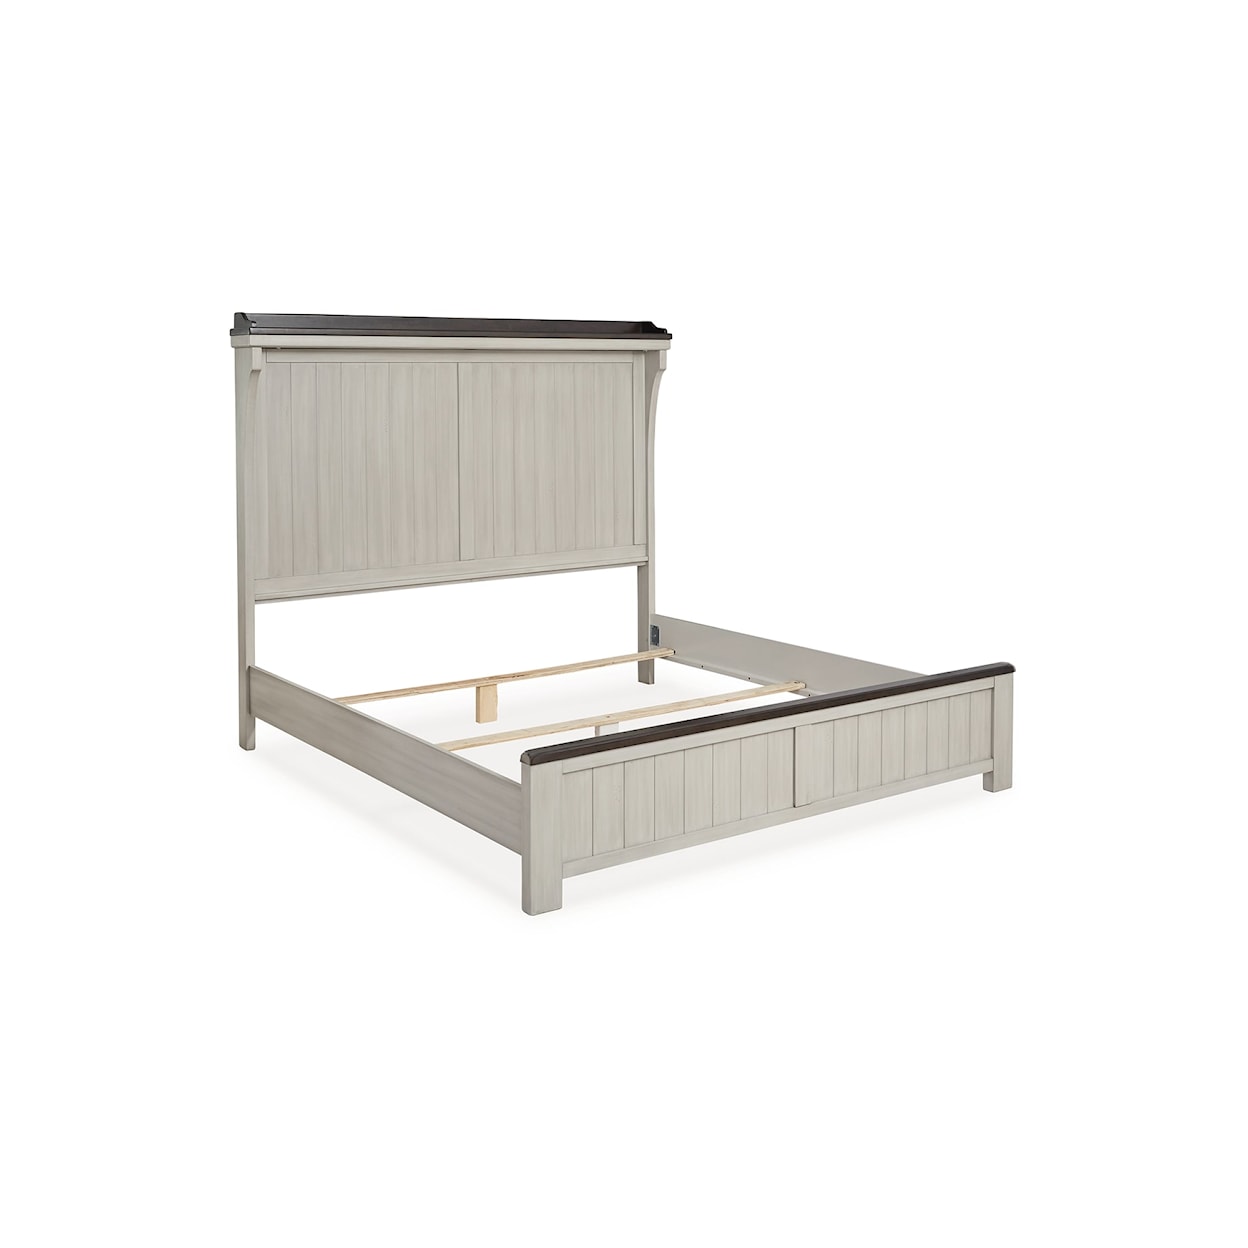 Signature Design by Ashley Darborn Queen Panel Bed